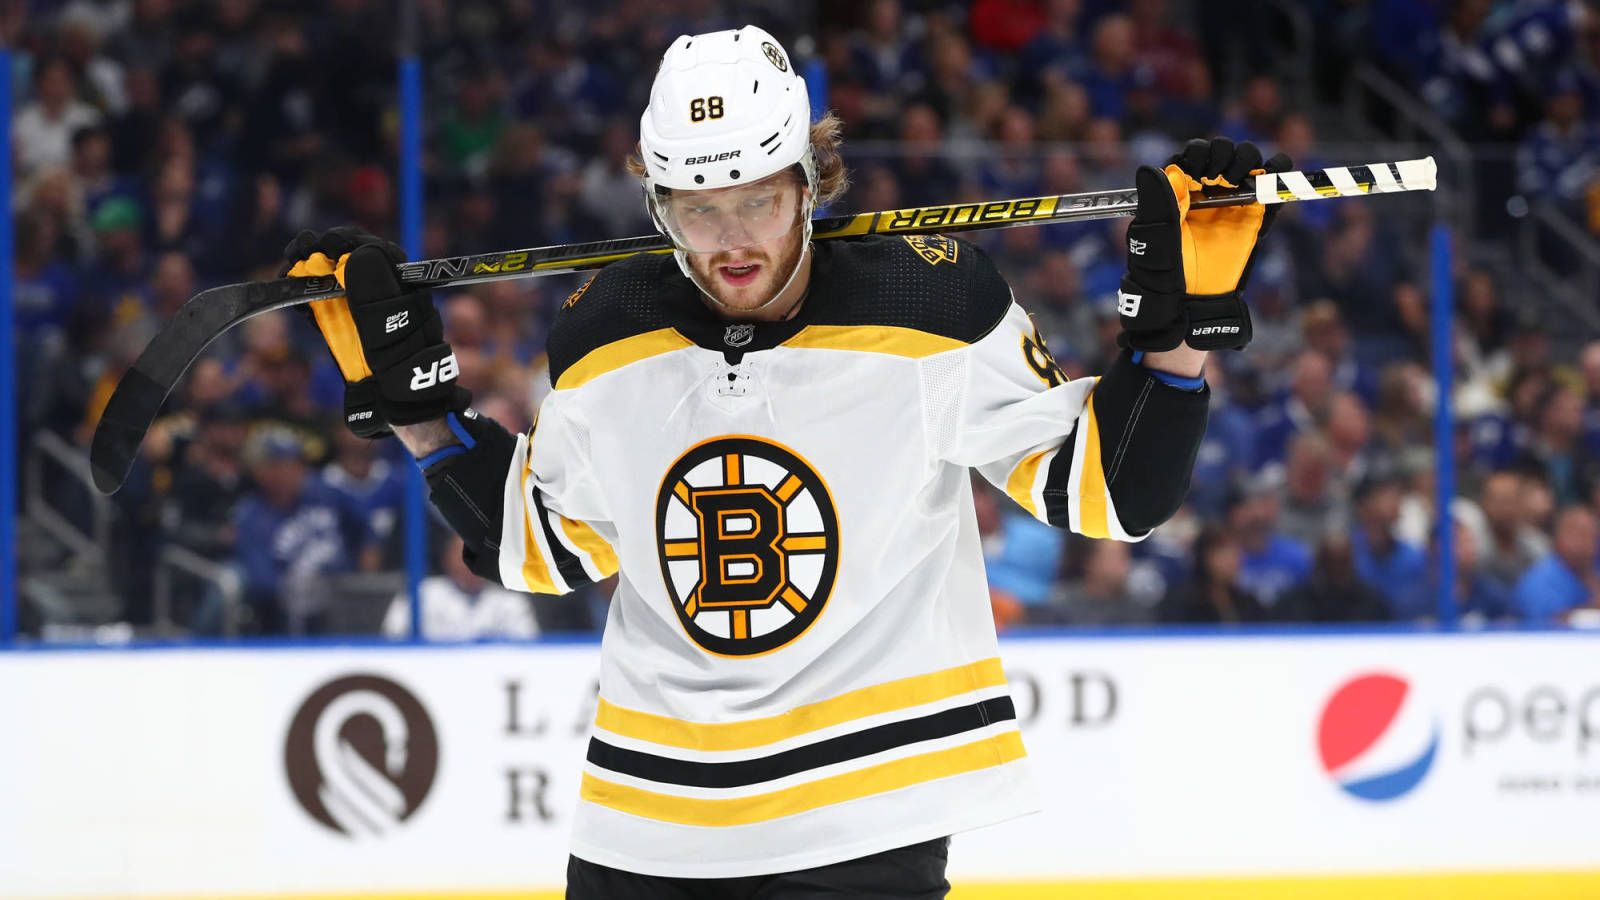 David Pastrnak Ties Jaromir Jagr's Record With Fourth Straight Czech Player Of Year Award